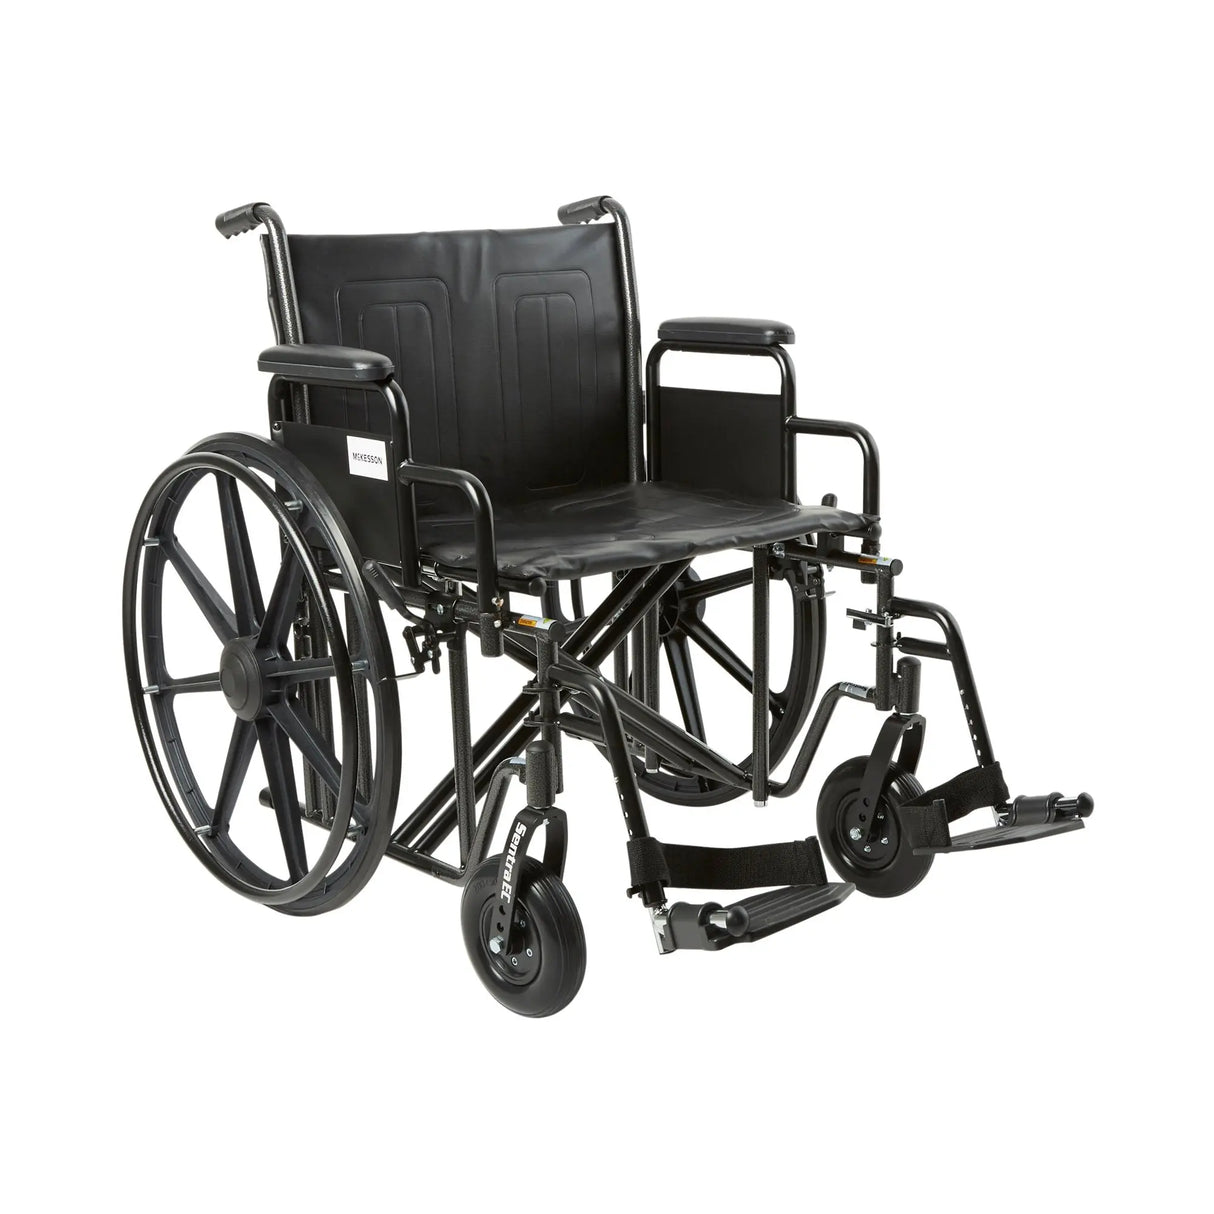 Bariatric Wheelchair McKesson Dual Axle Desk Length Arm Swing-Away Footrest Black Upholstery 22 Inch Seat Width Adult 450 lbs. Weight Capacity - getMovility